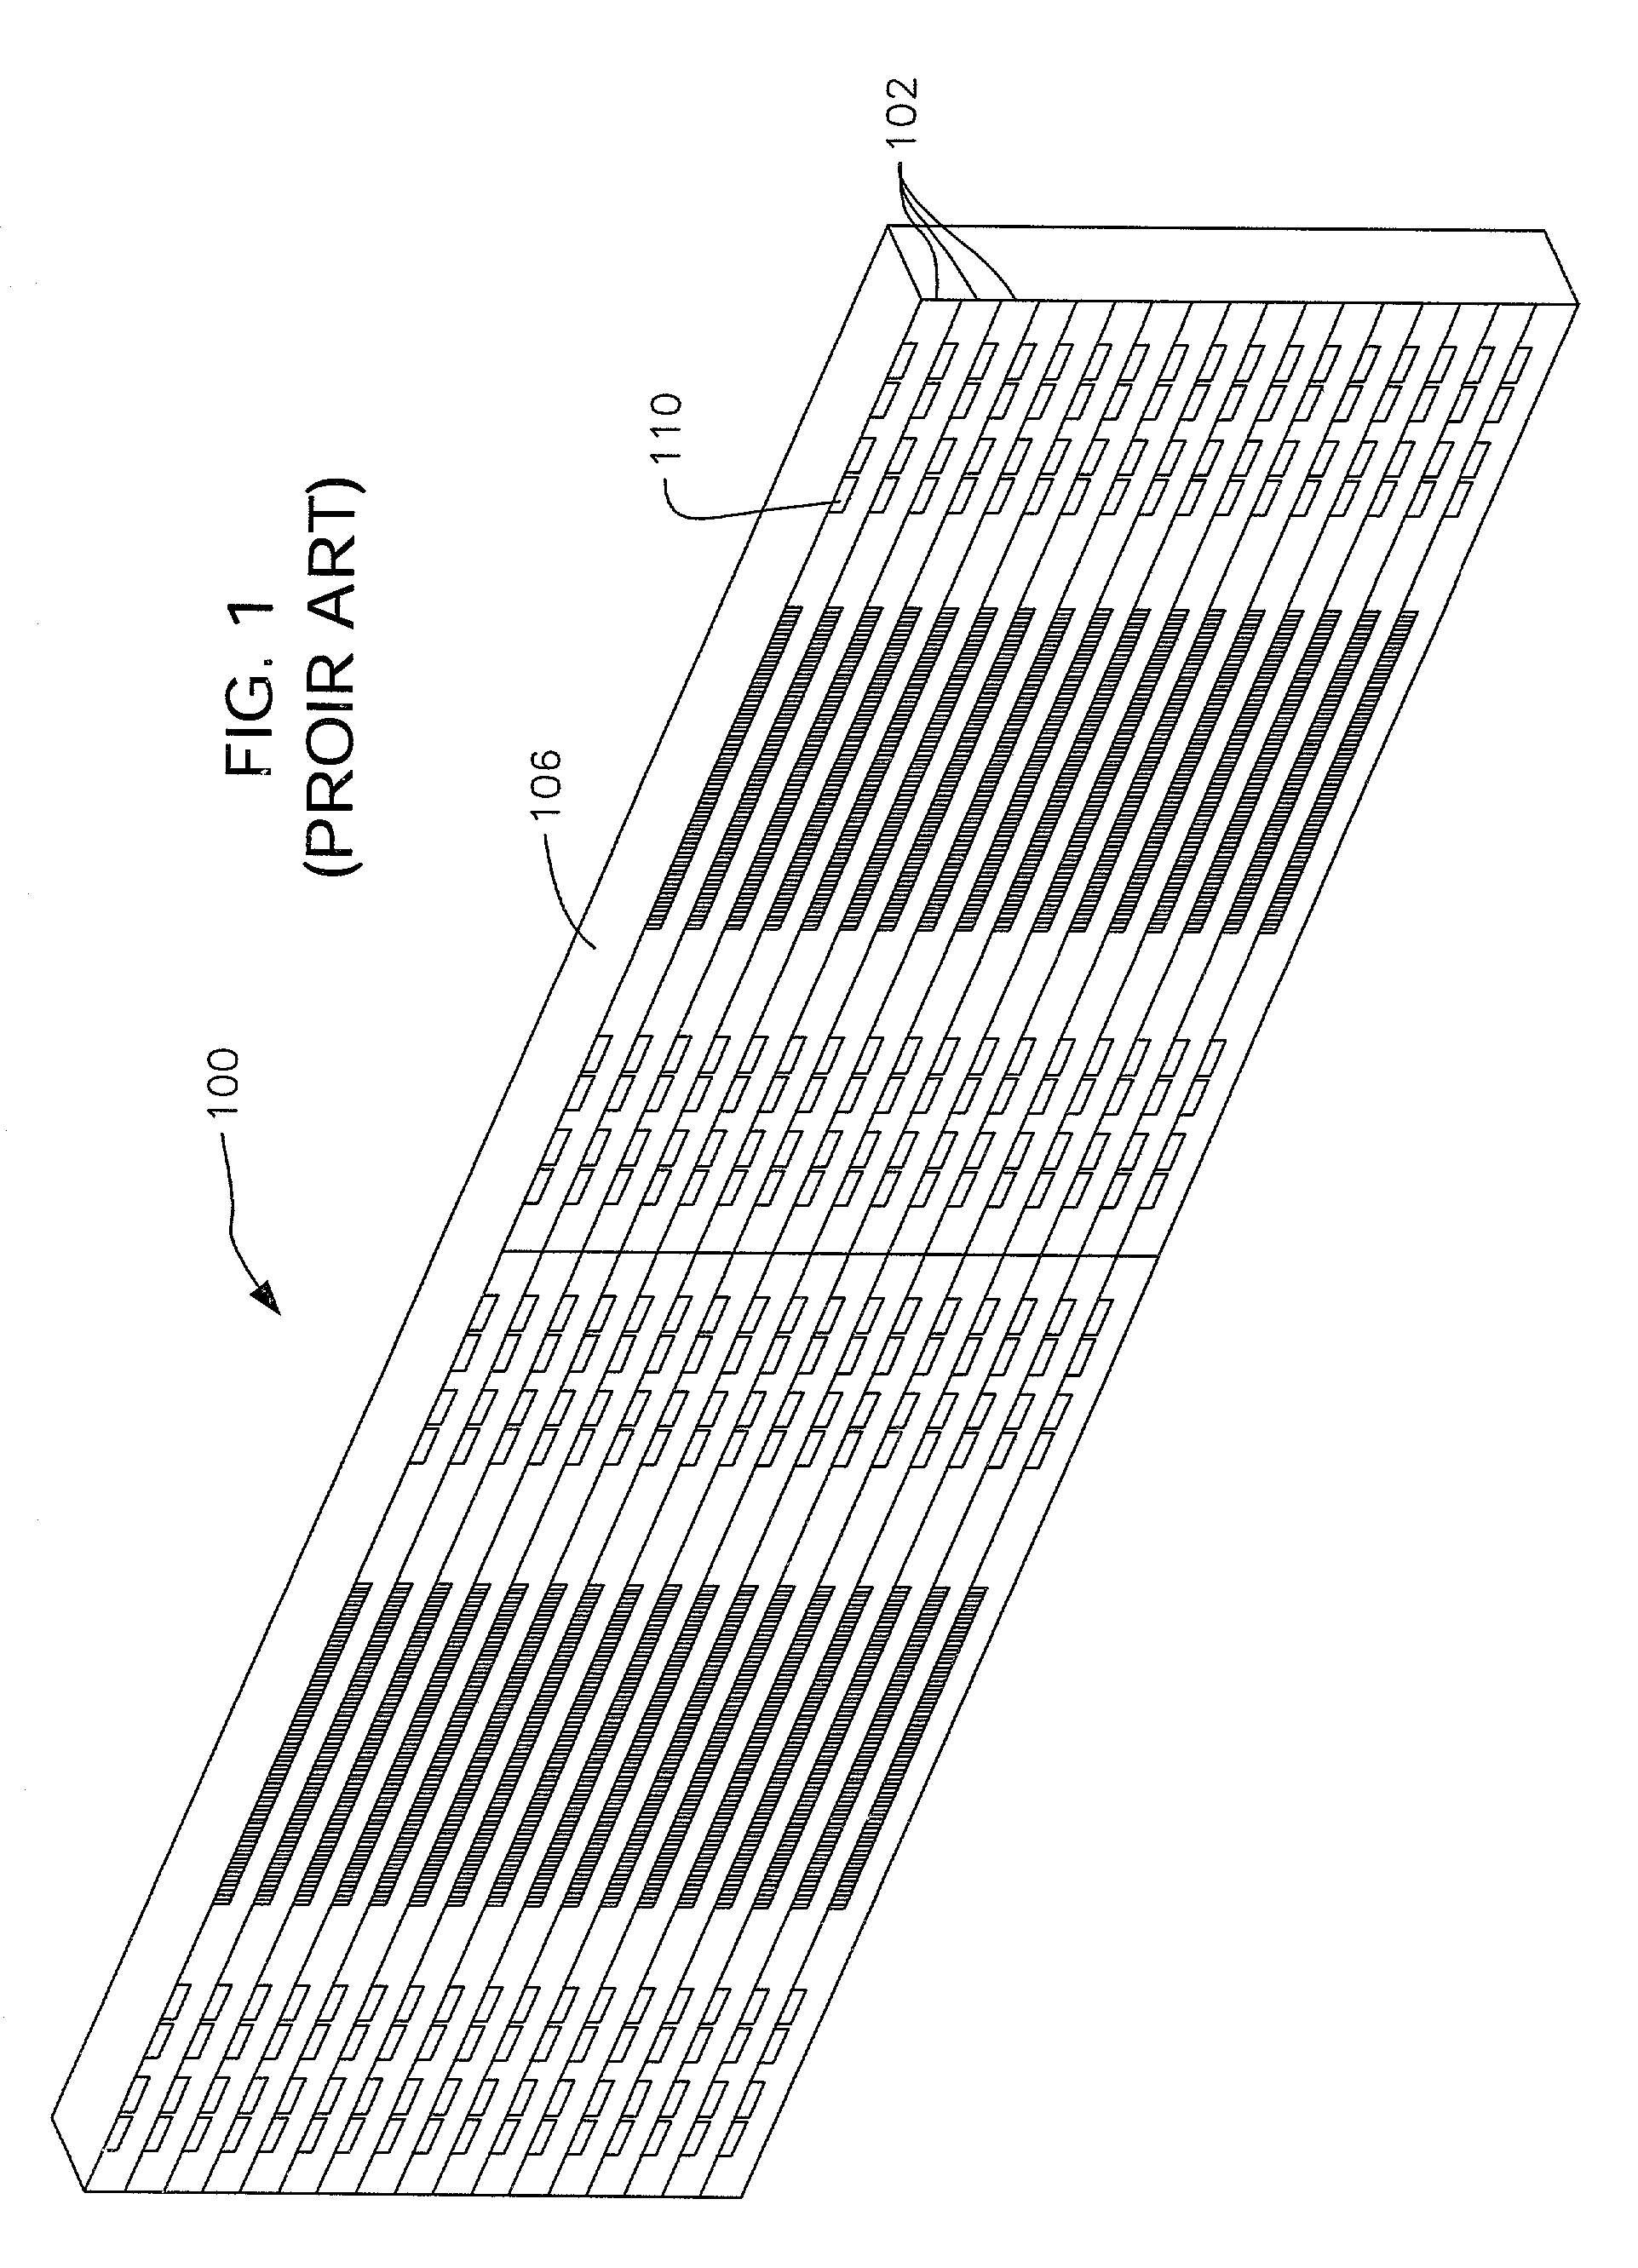 Thin-film tape head having single groove formed in head body and corresponding process